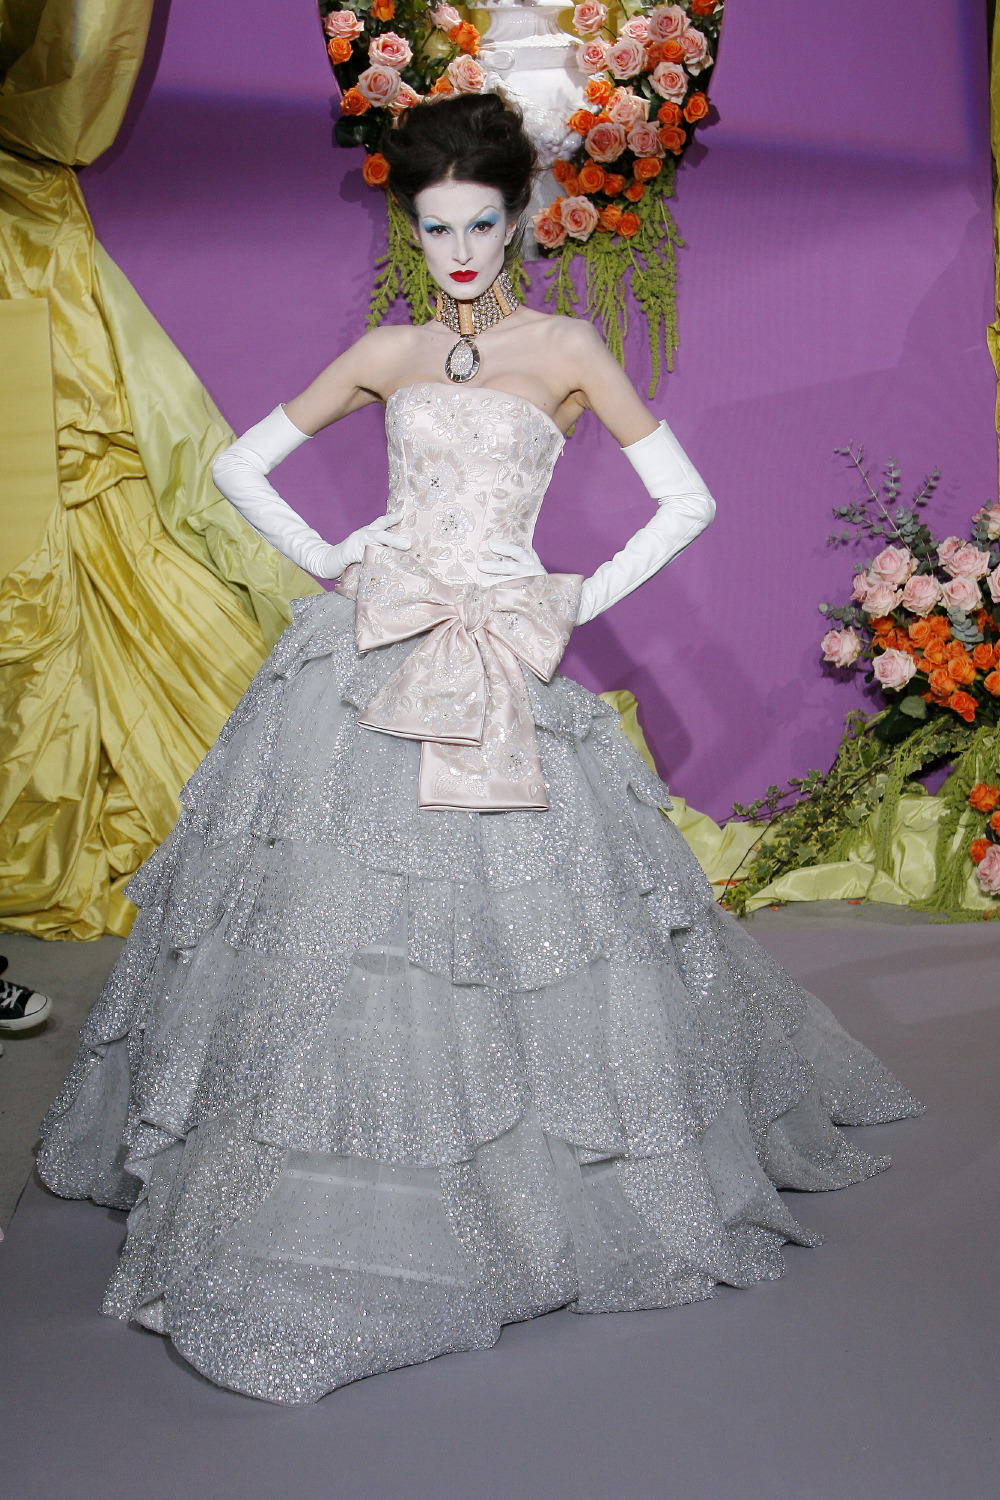 Christian Dior Haute Couture Spring 2010: Turning Back the Clock